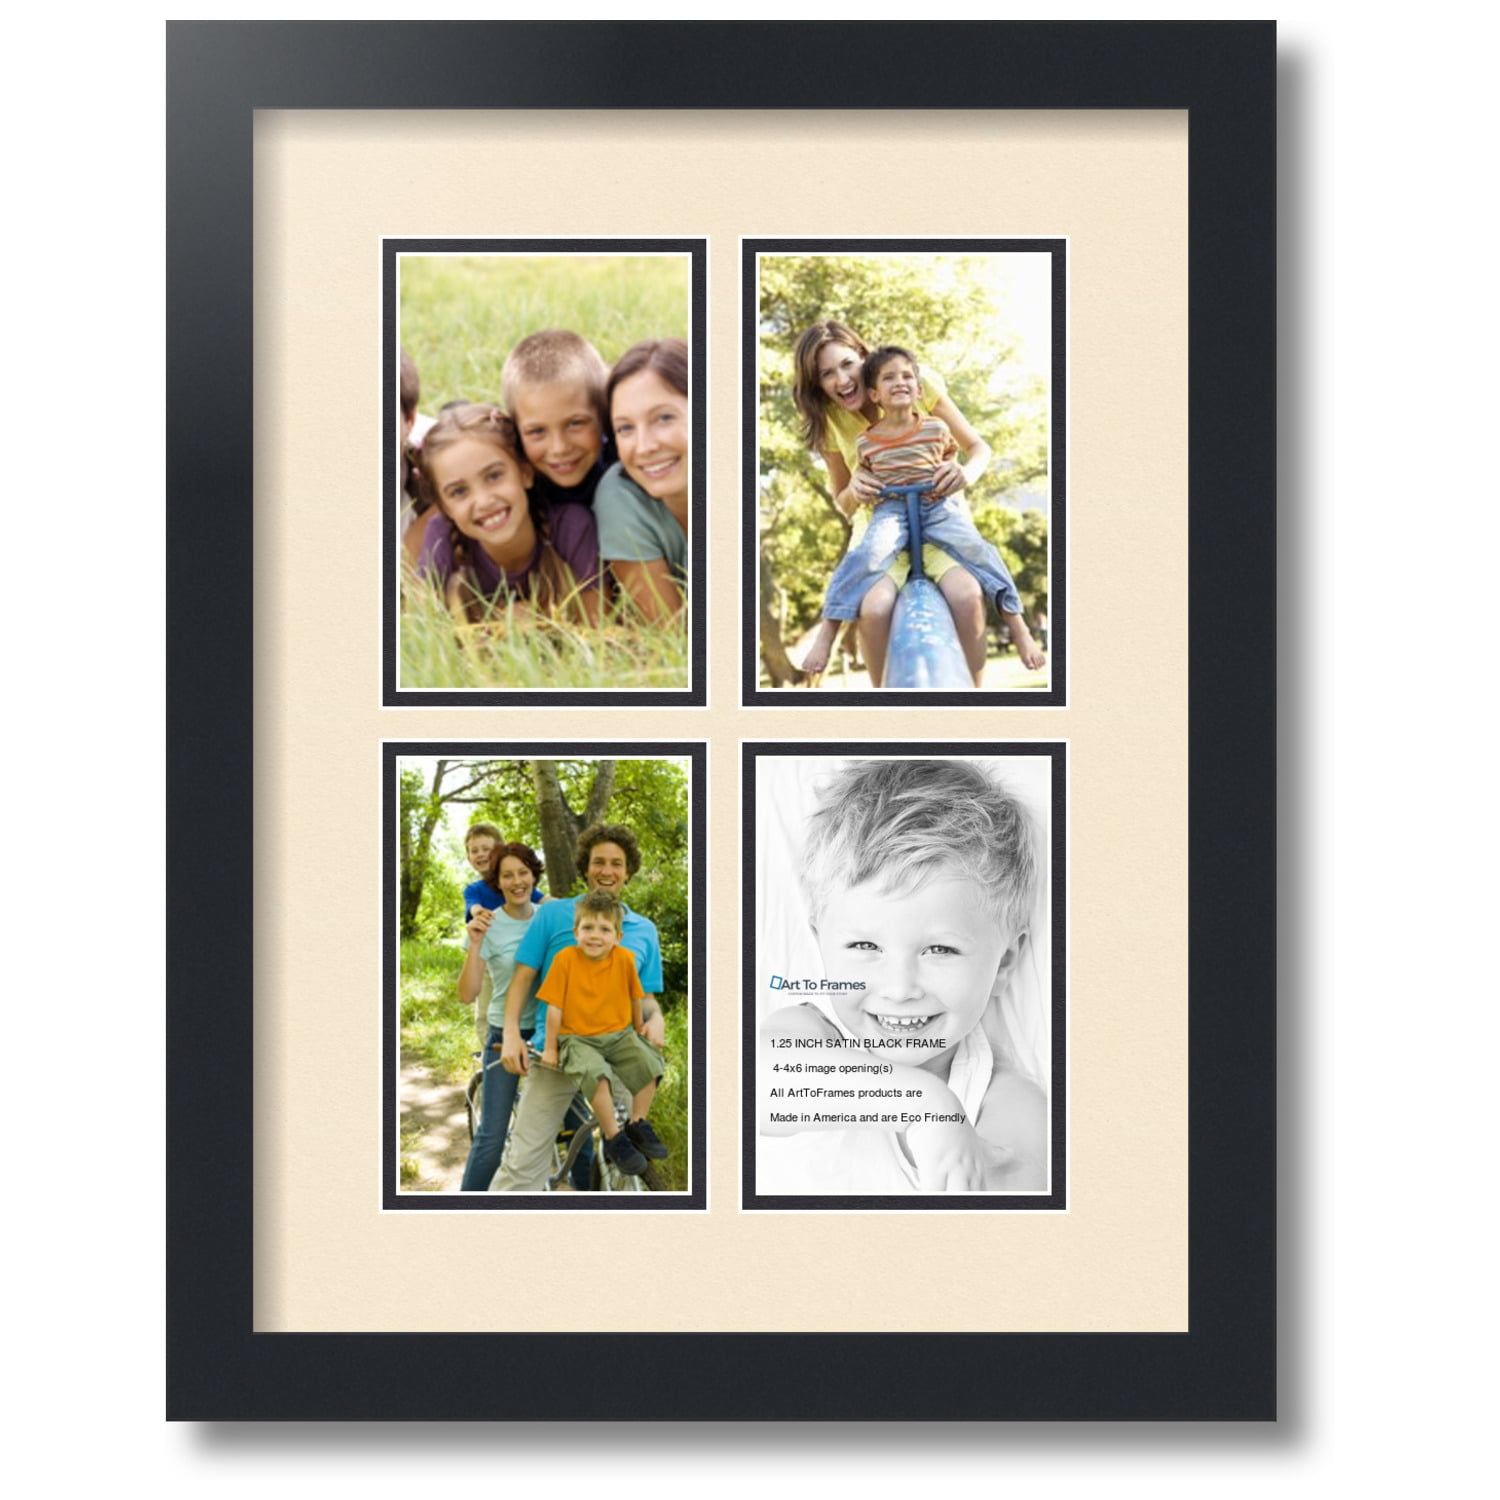 4x6 Openings with Satin Black Frame and Scotch Mist mat. ArtToFrames Collage Photo Frame Double Mat with 2-5x7 